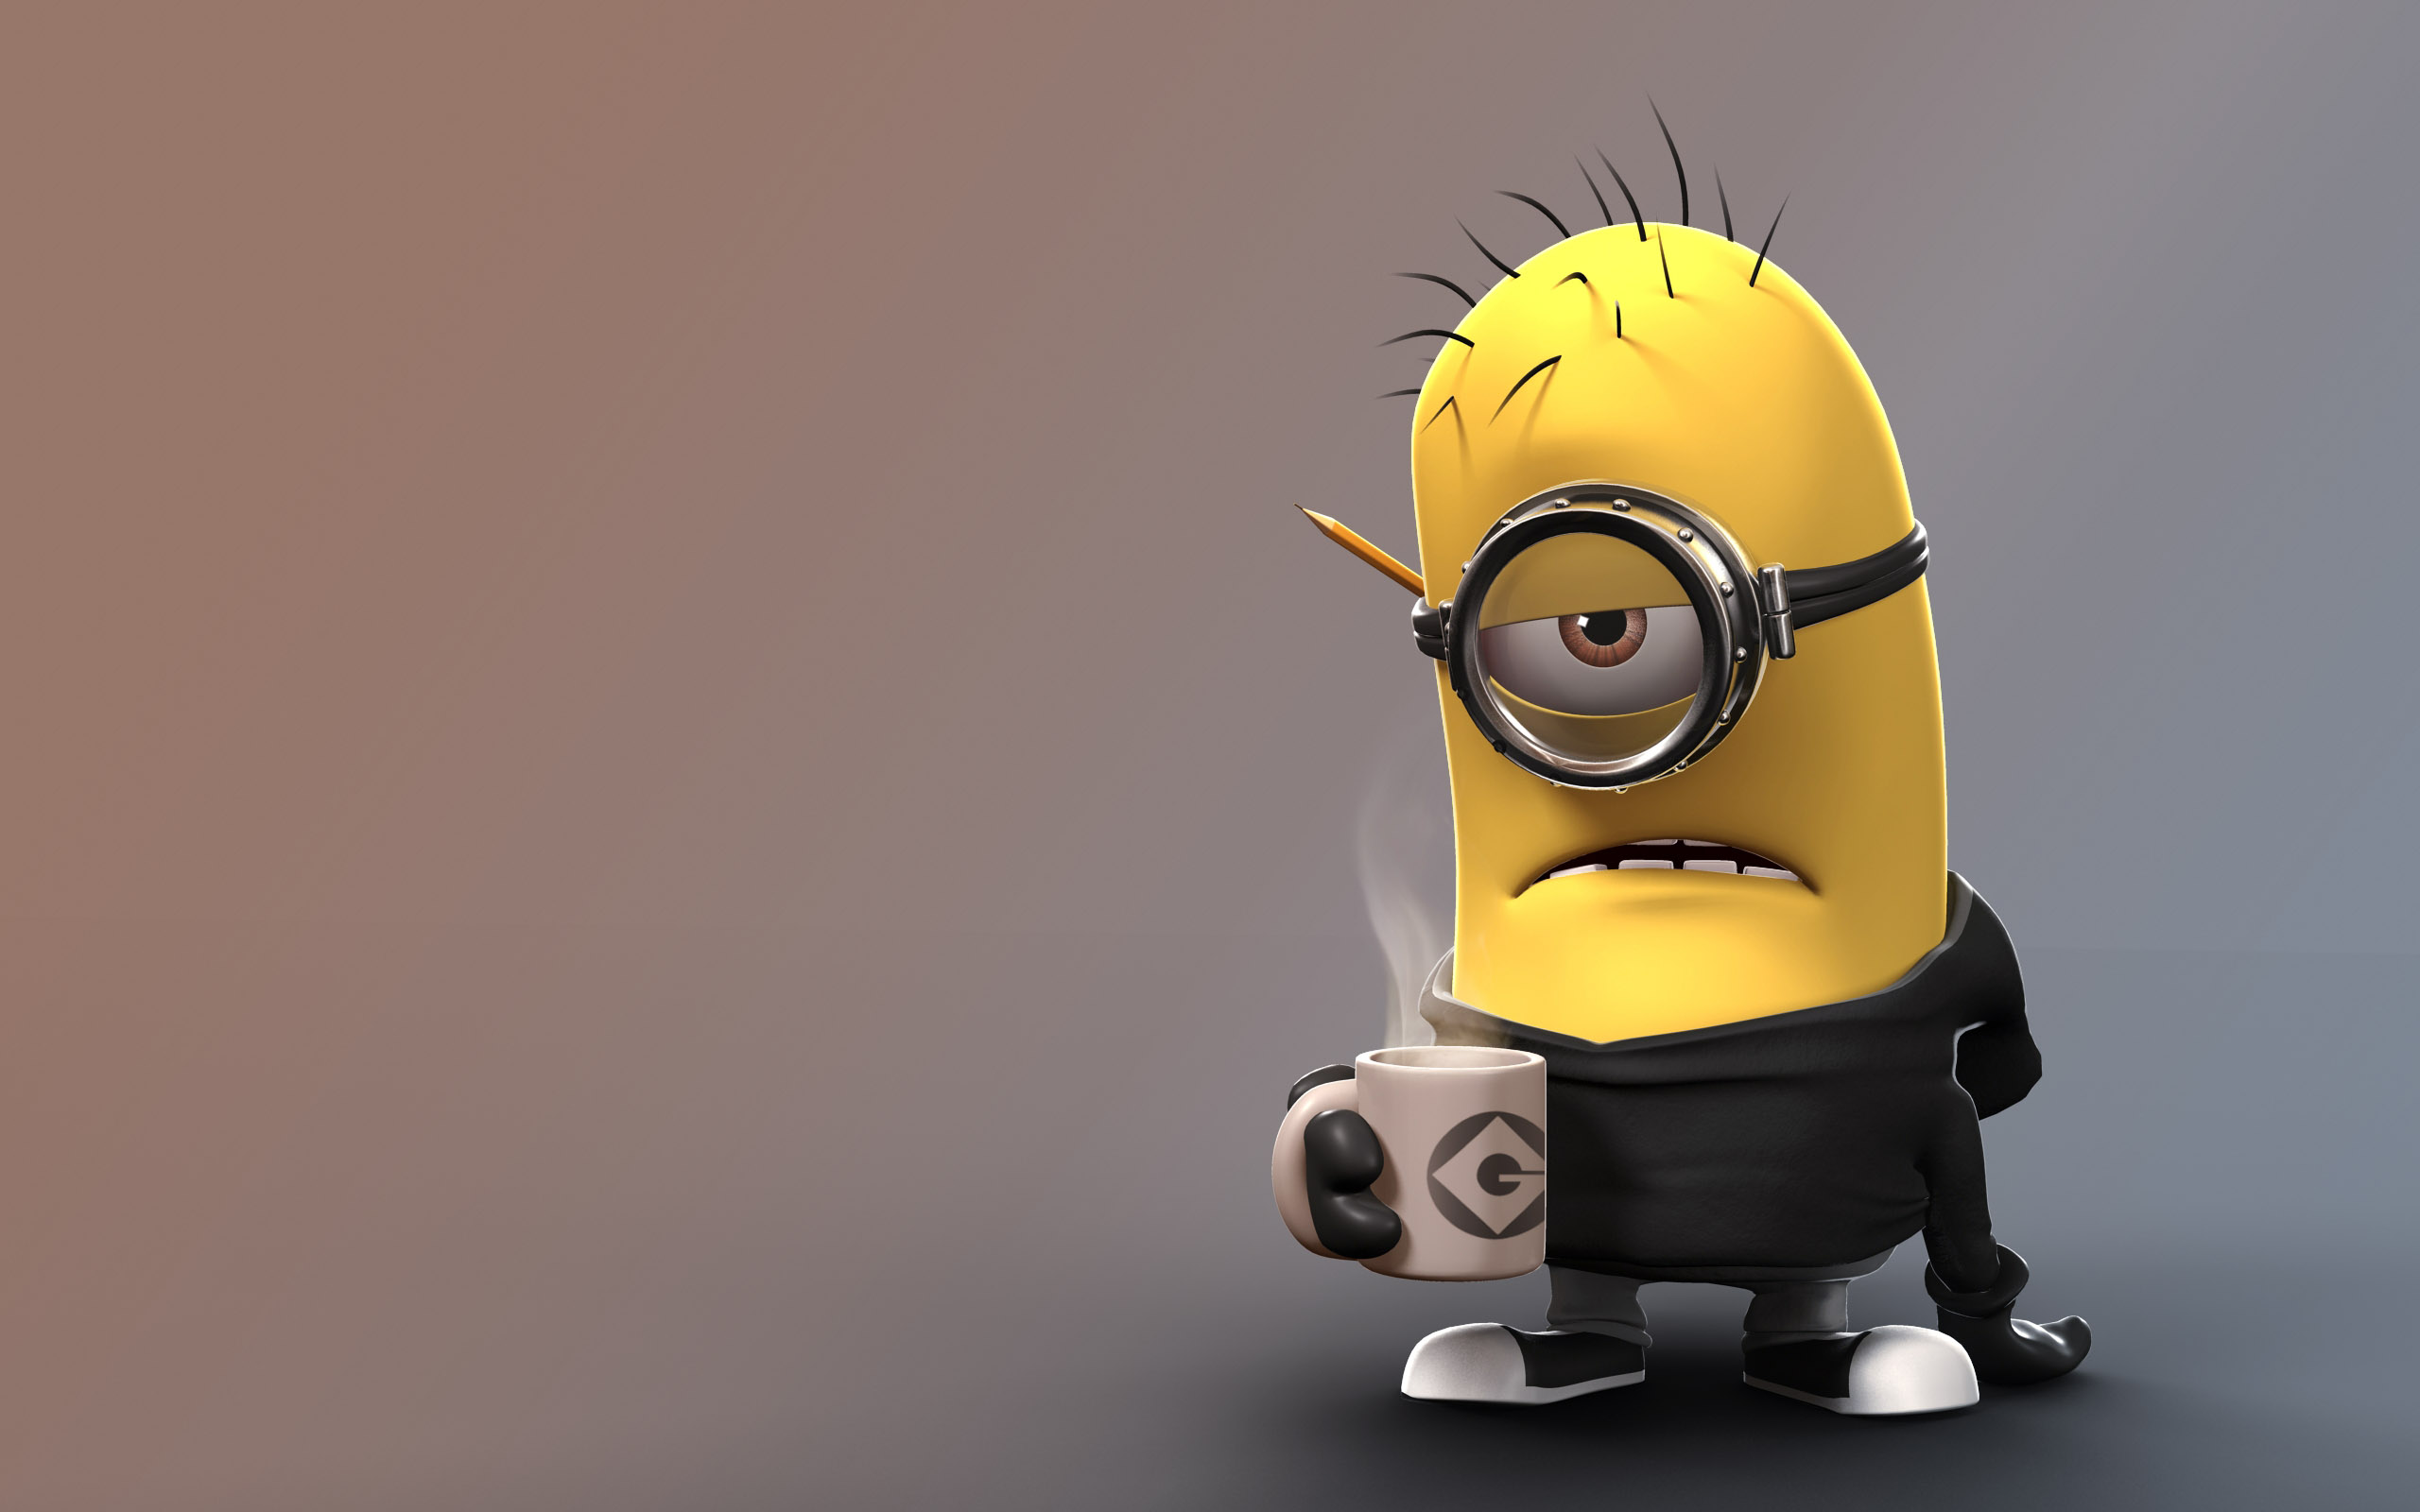  Collection Of Despicable Me 2 Minions Wallpapers Images Fan Art